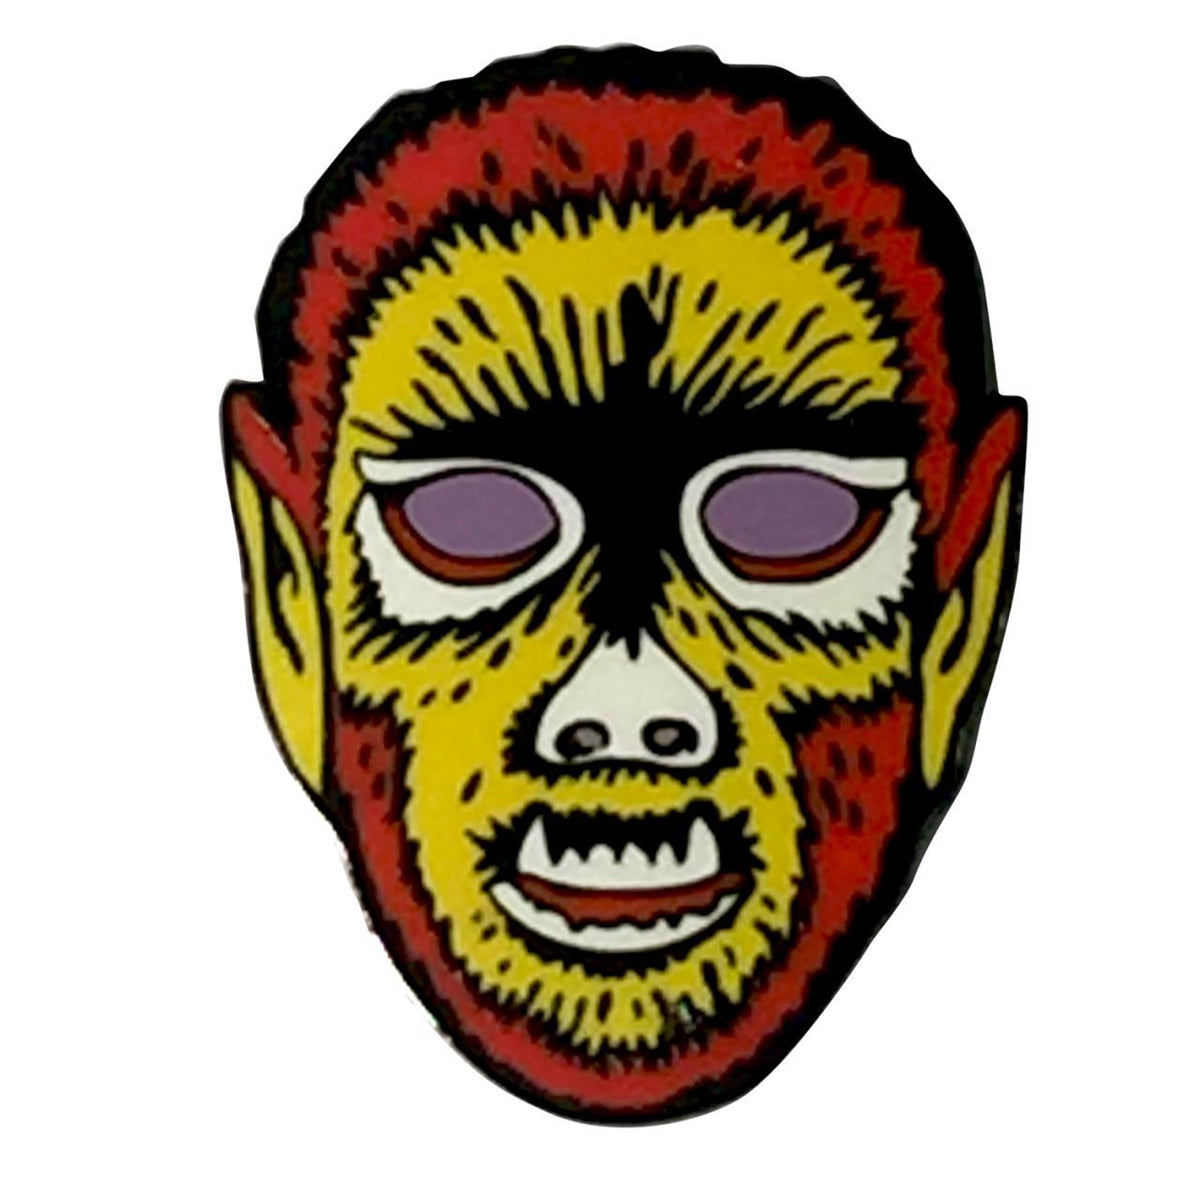 retro Halloween style "Electric Wolfman" mask 1" x 1 1/4" enameled metal clutch back pin